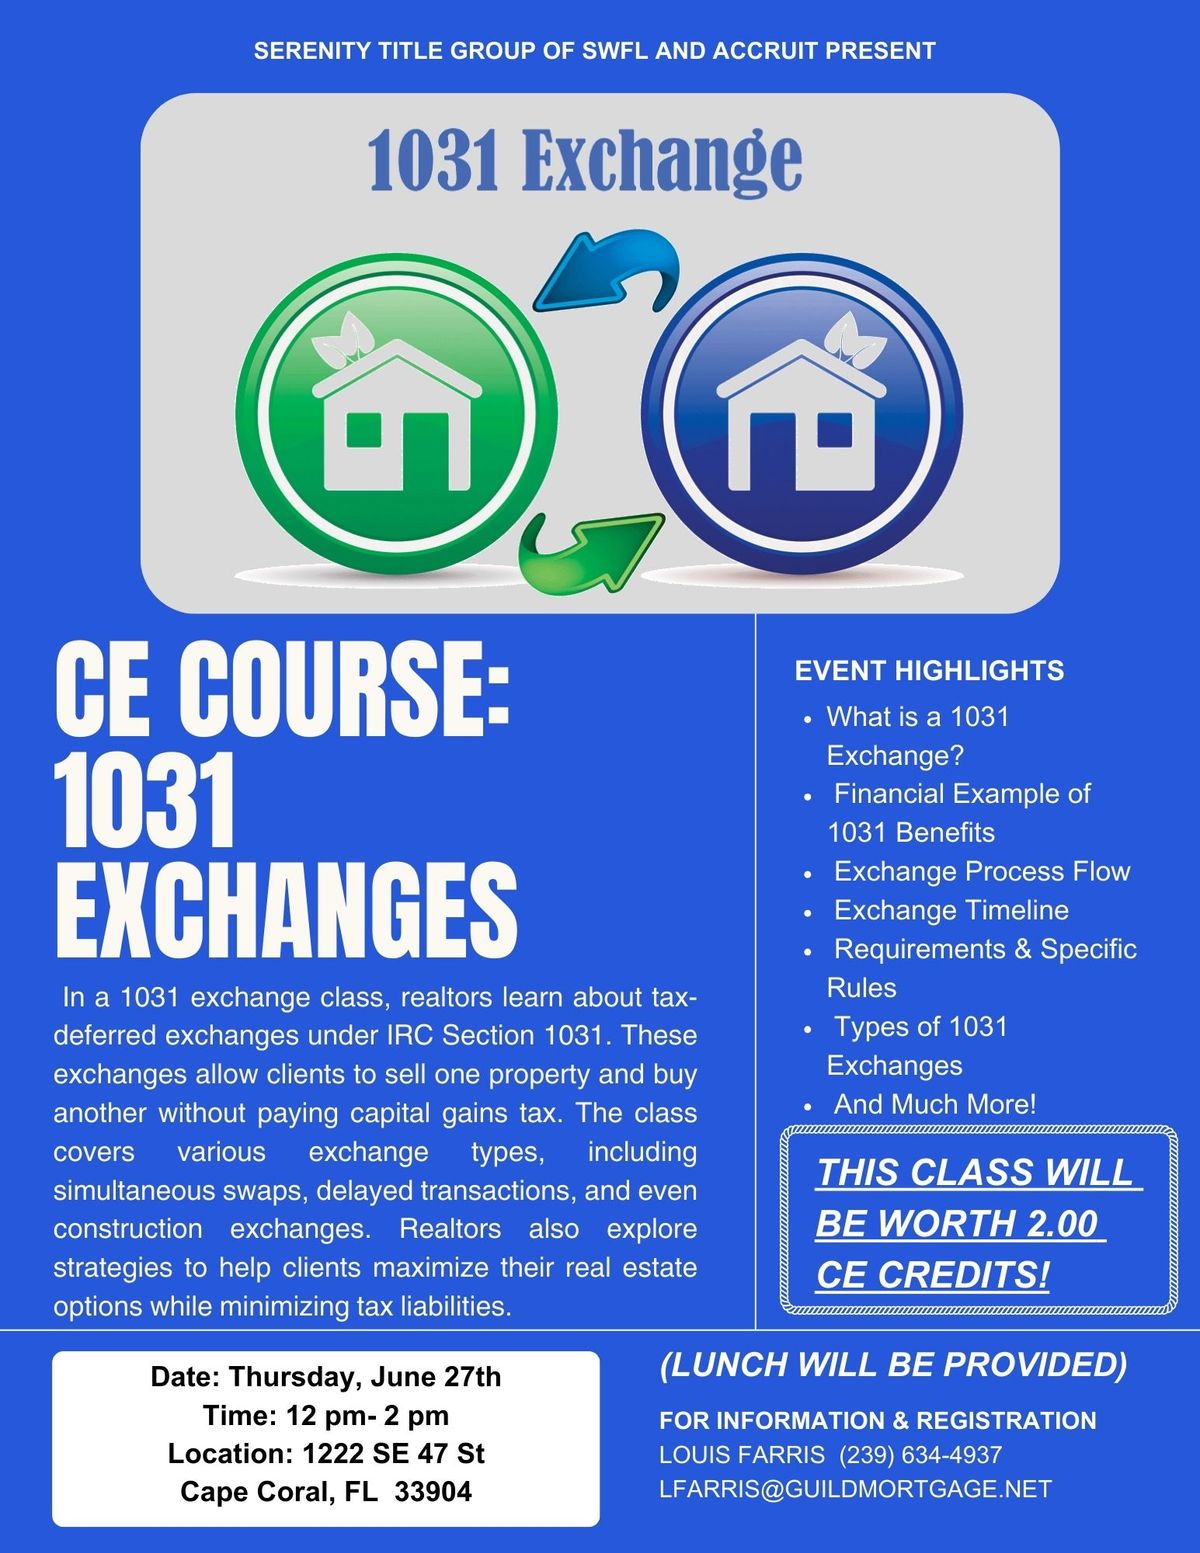 1031 Exchange: Everything you need to know (CE Credit)